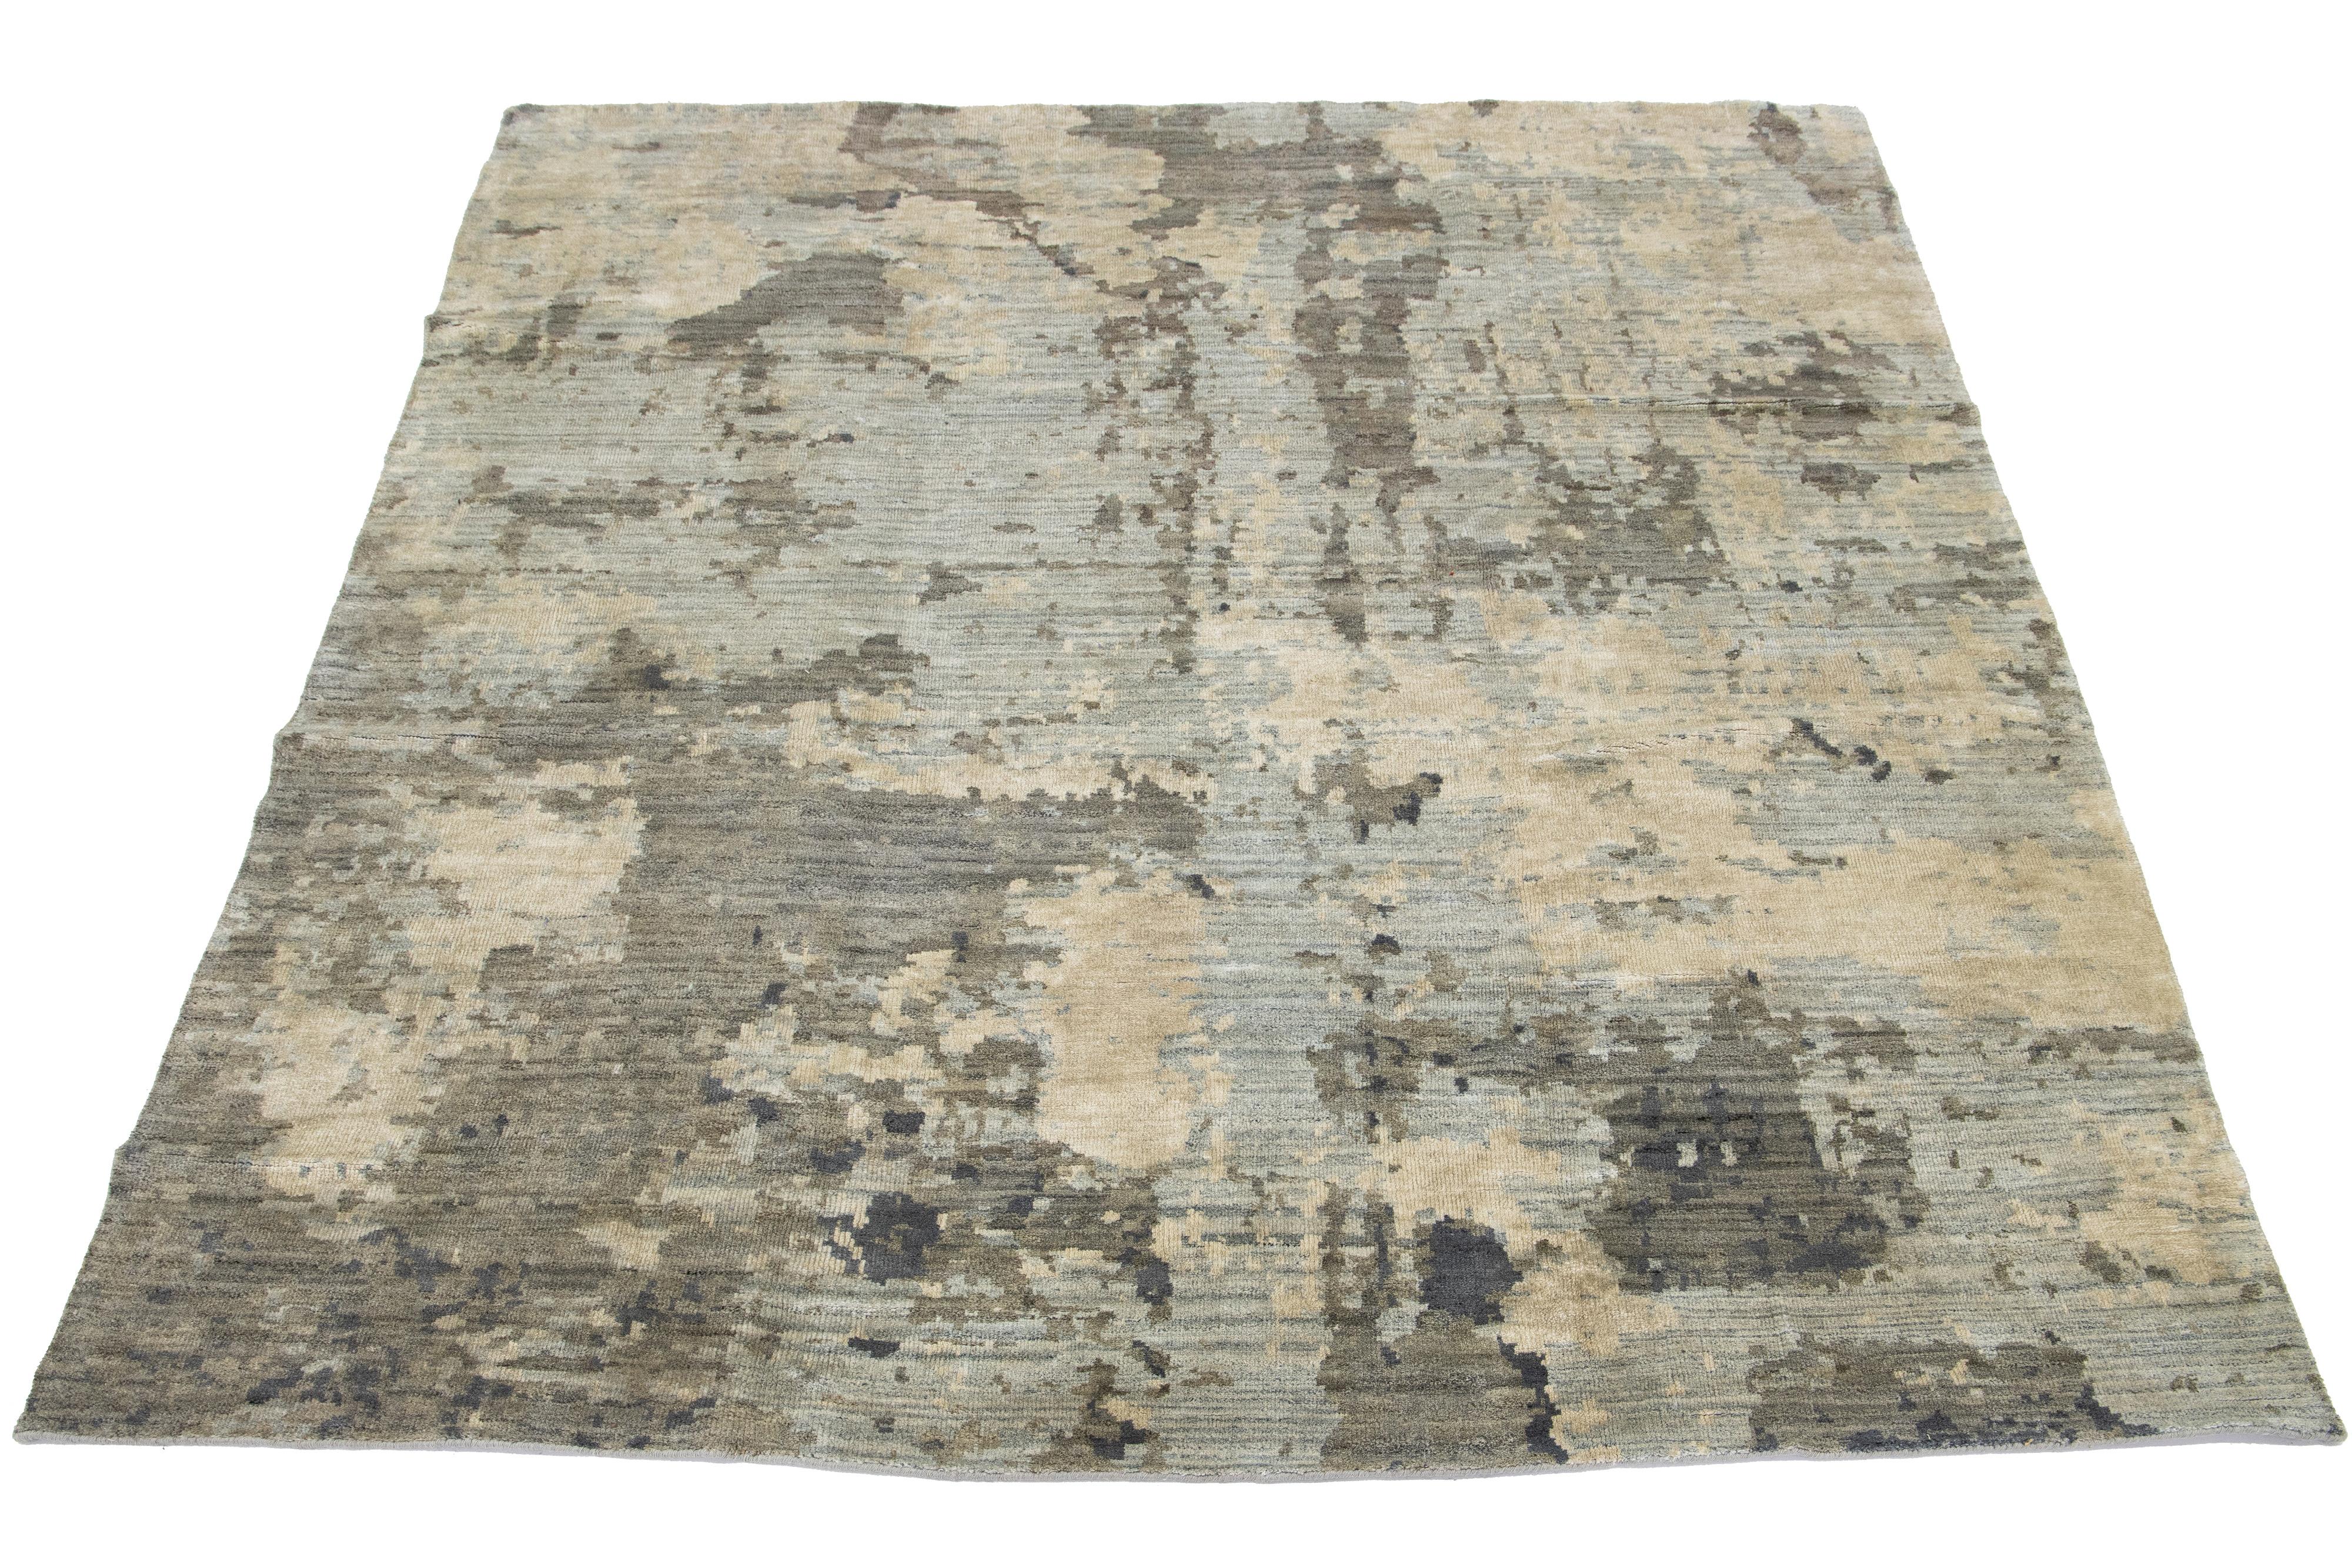 This beautiful modern hand-knotted rug is made of wool and silk and features a color field of beige and gray. The rug has a stunning all-over abstract design.

This rug measures 7'10